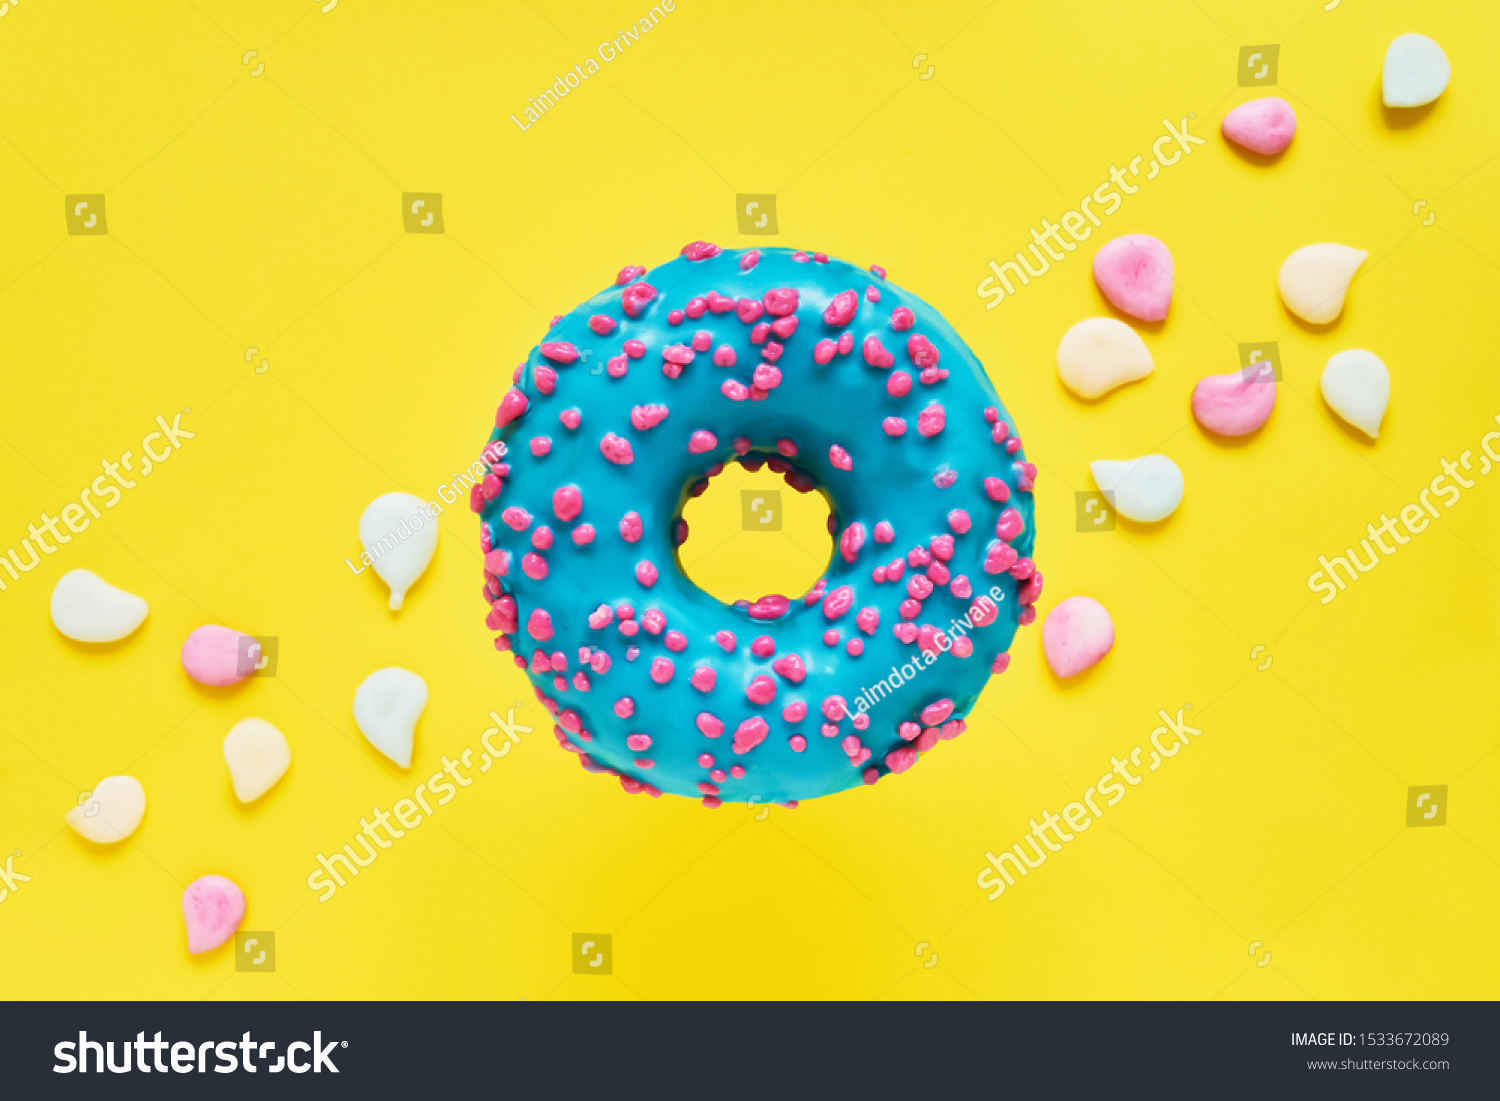 Sprinkled Blue Donut. Glazed sprinkled donut on bright yellow background with colorful candies. Top view, copy space #1533672089